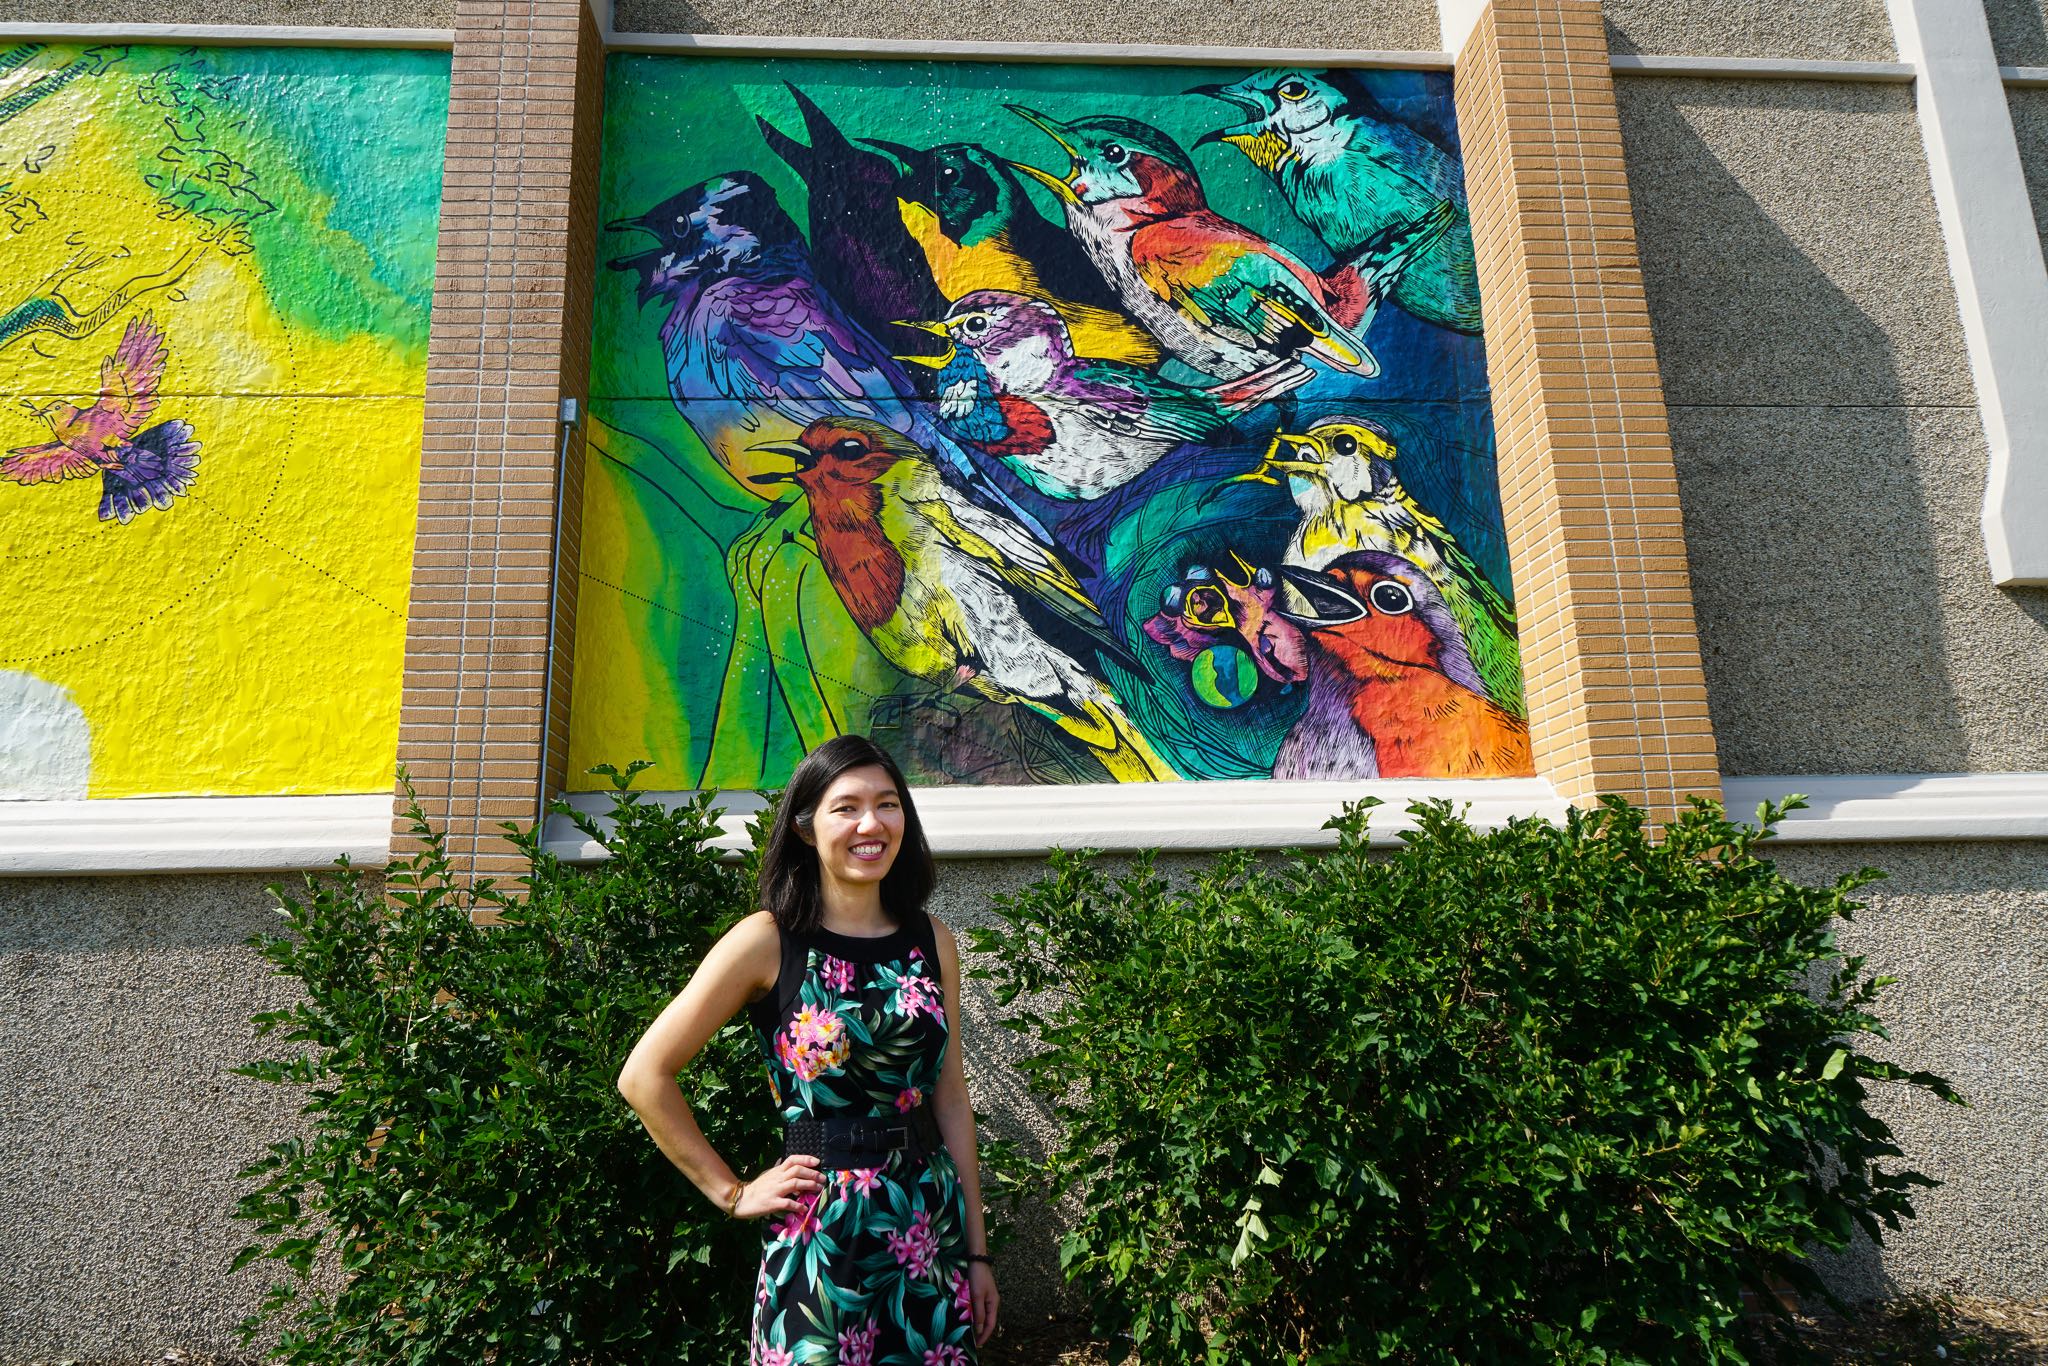 Giant Mural at Lutheran Church with Jenie Gao